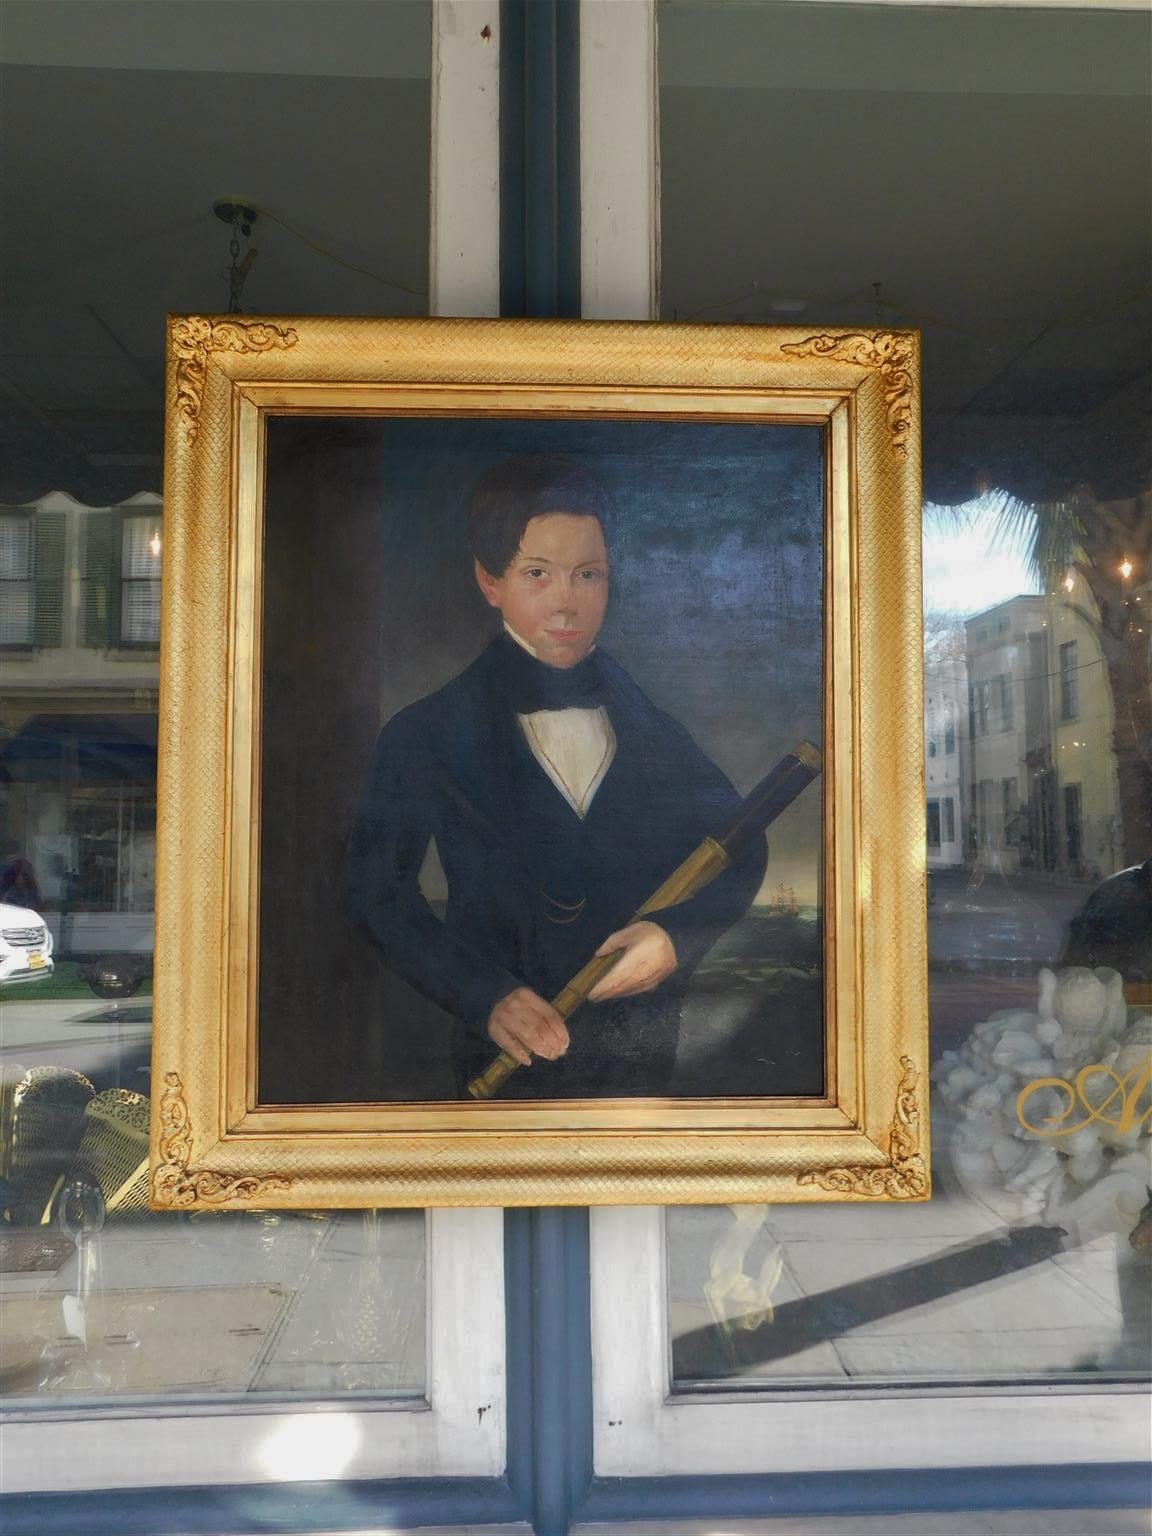 American portrait oil on canvas of a young ship captain holding a spyglass with a sailing ship, crew in rowboat, and gulls in lower background mounted in the original decorative gilt honeycomb floral frame, Mid-19th century.